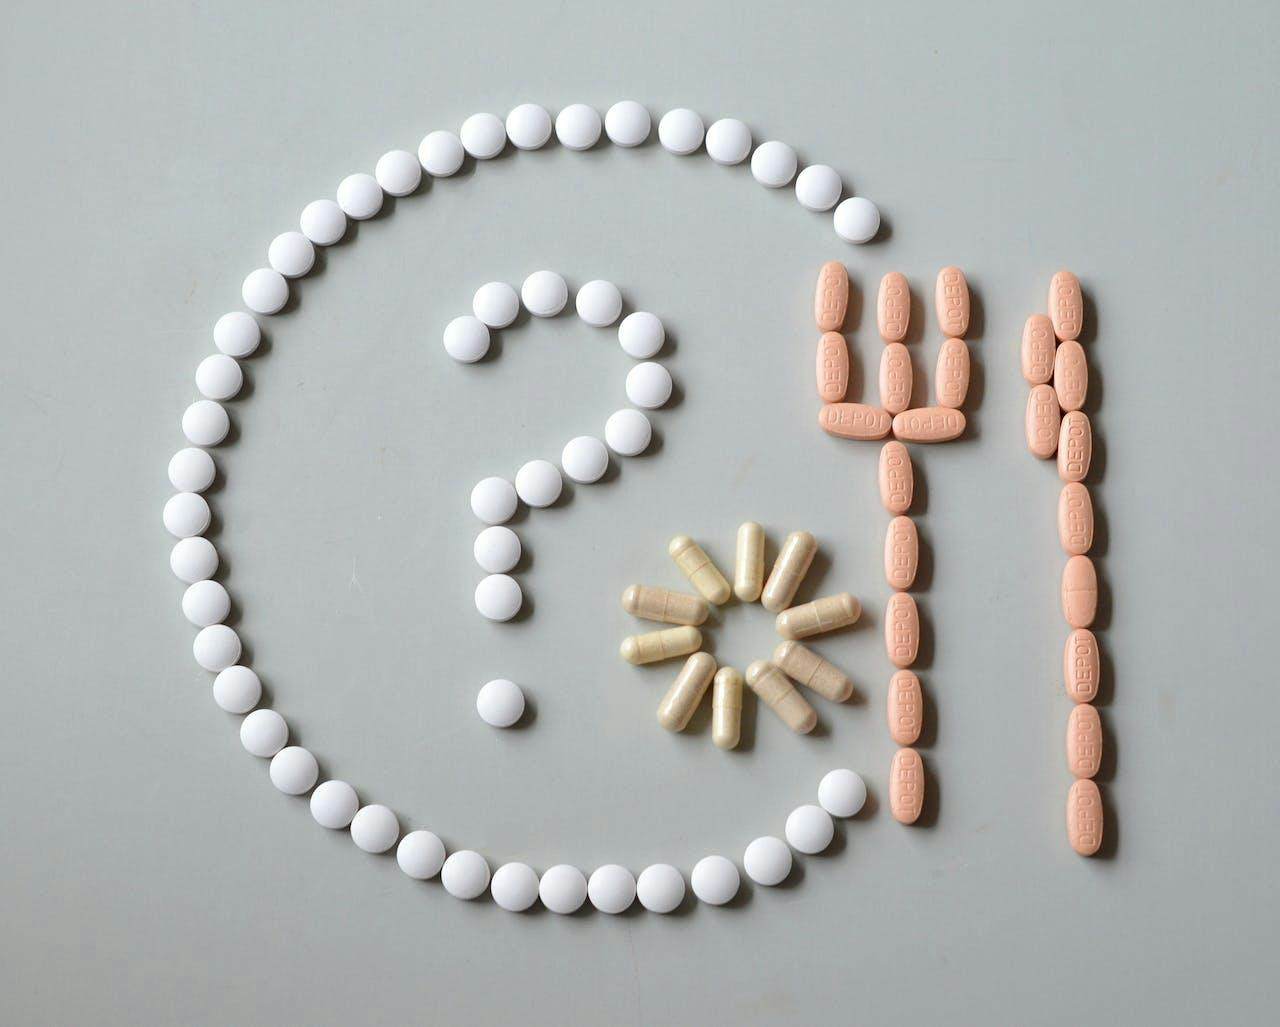 Are there any foods to avoid while taking mirtazapine?